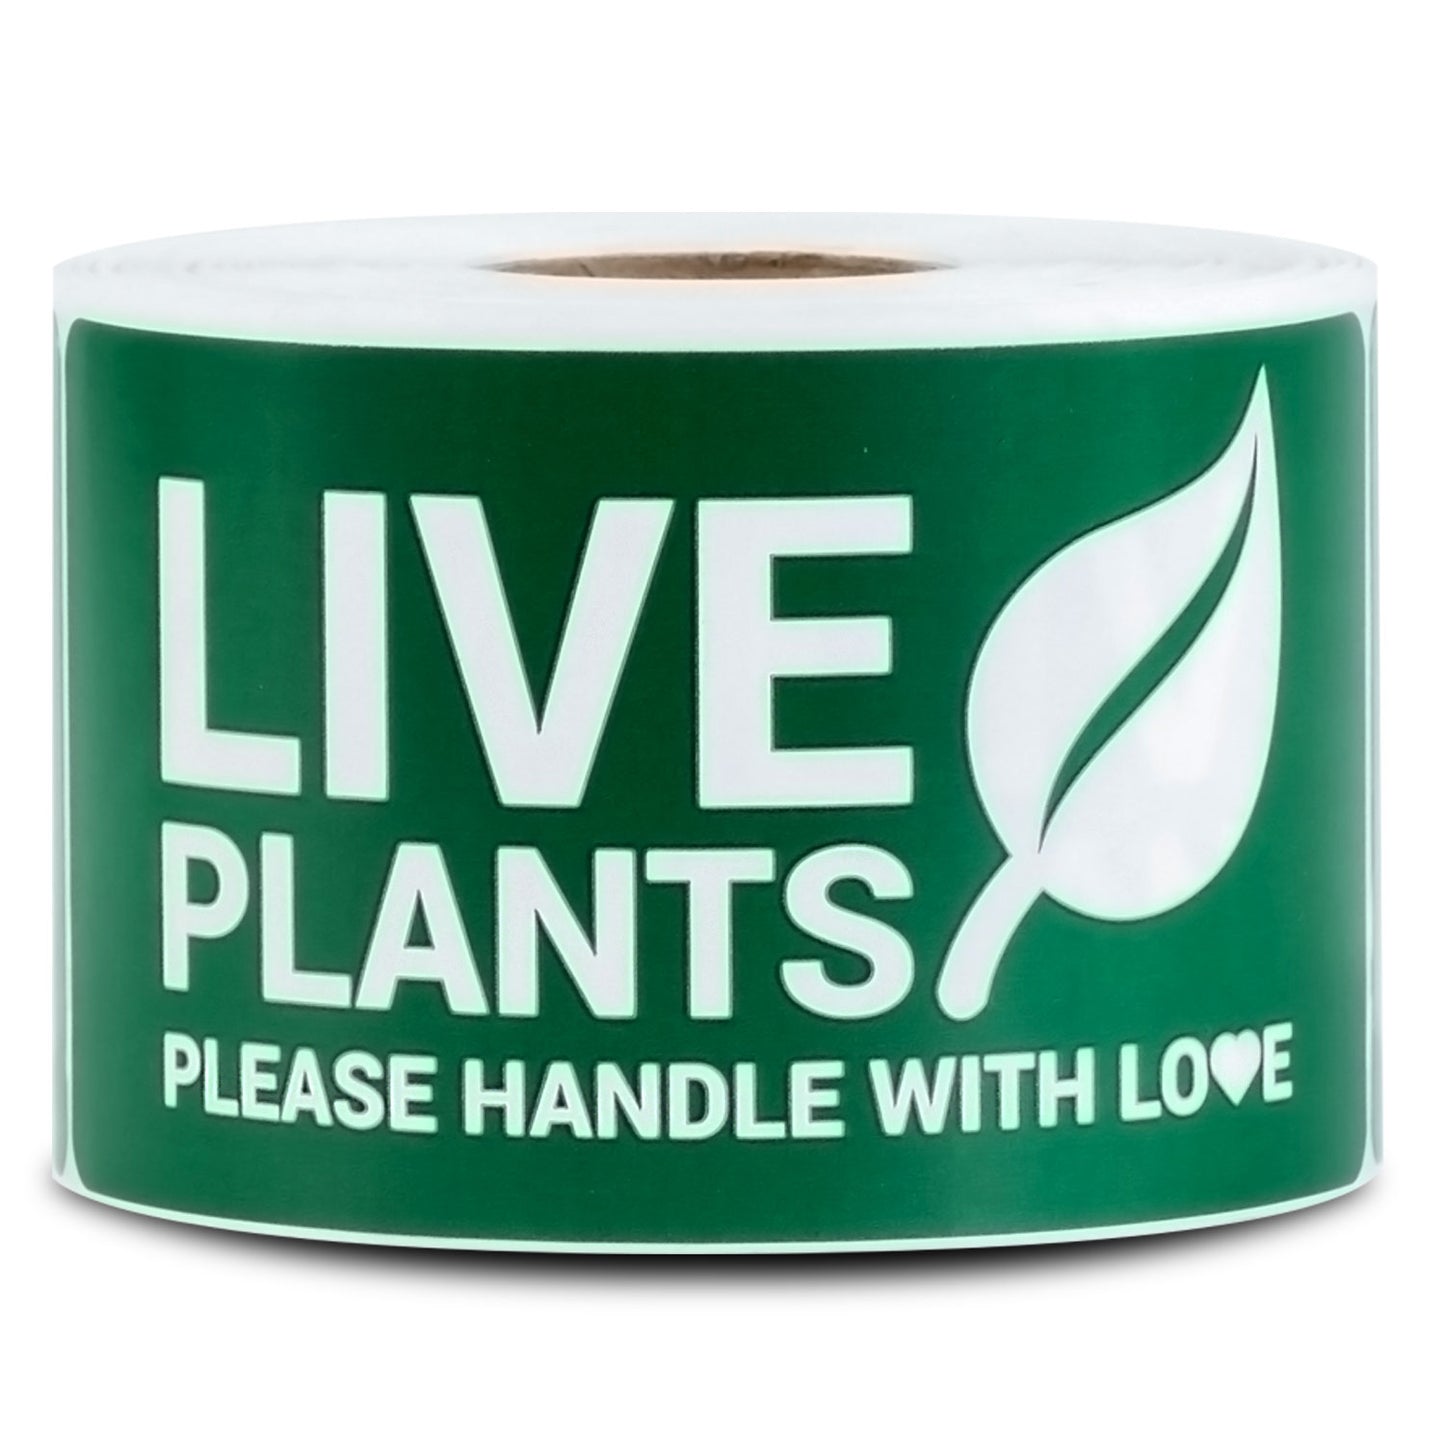 4 x 2 inch | Shipping & Handling: Please Handle with Love, Live Plants Stickers